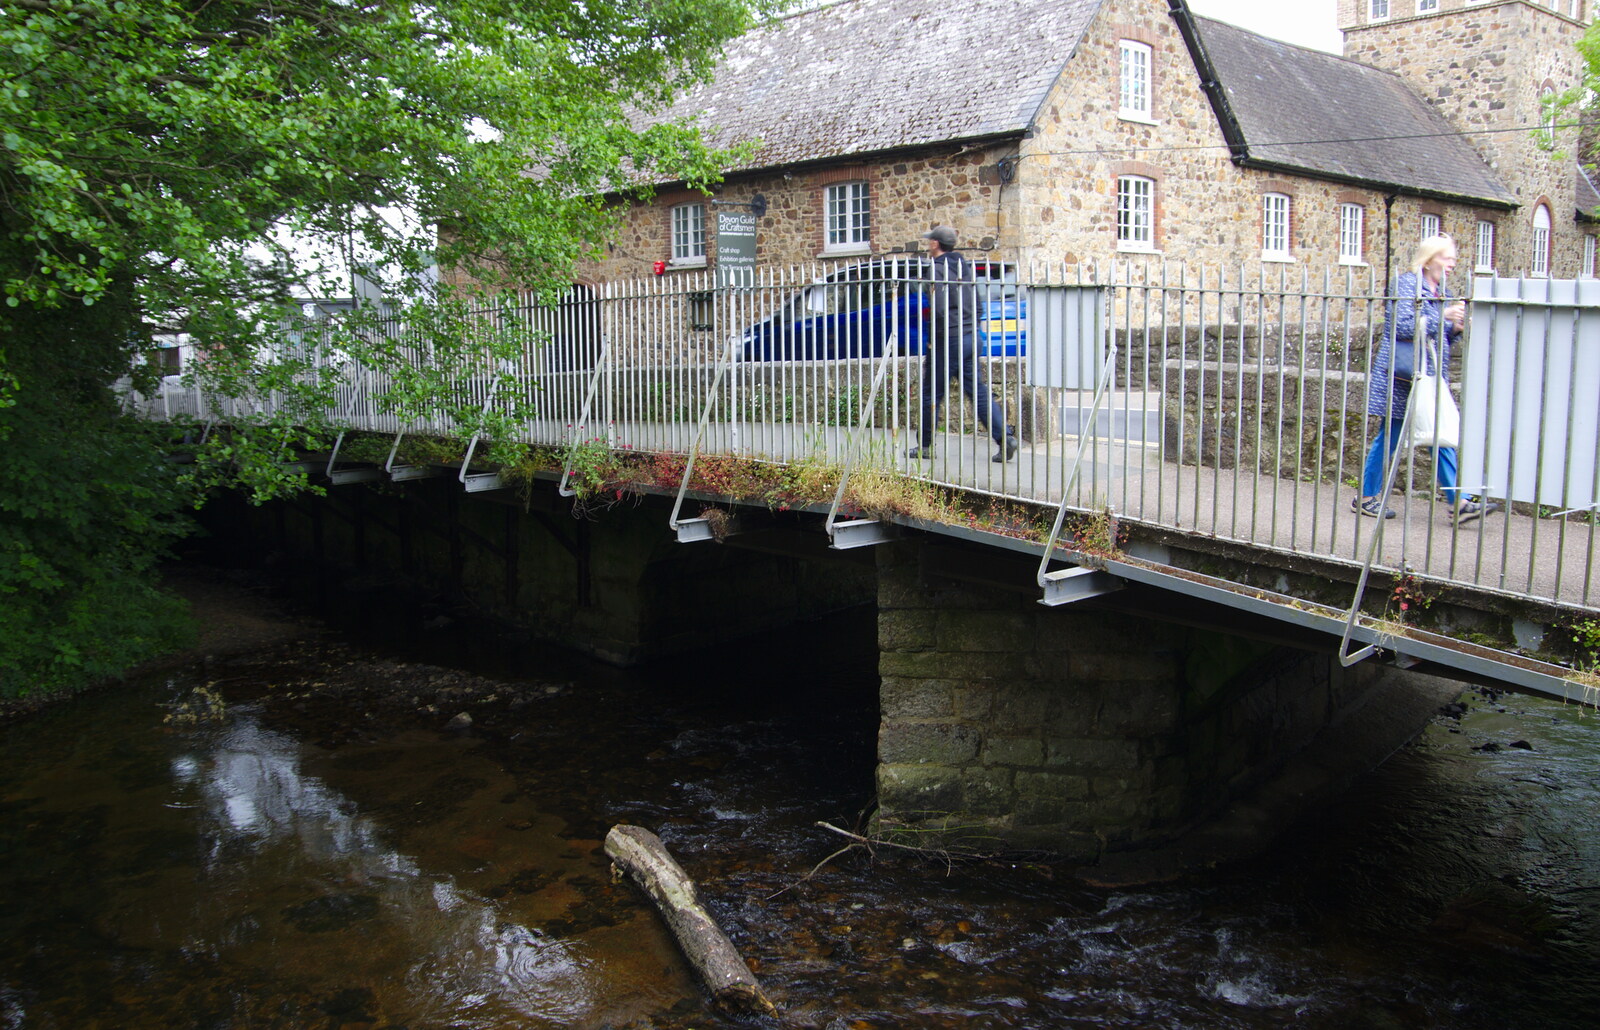 The bridge over the river at Bovey from The Tom Cobley and a Return to Haytor, Bovey Tracey, Devon - 27th May 2019